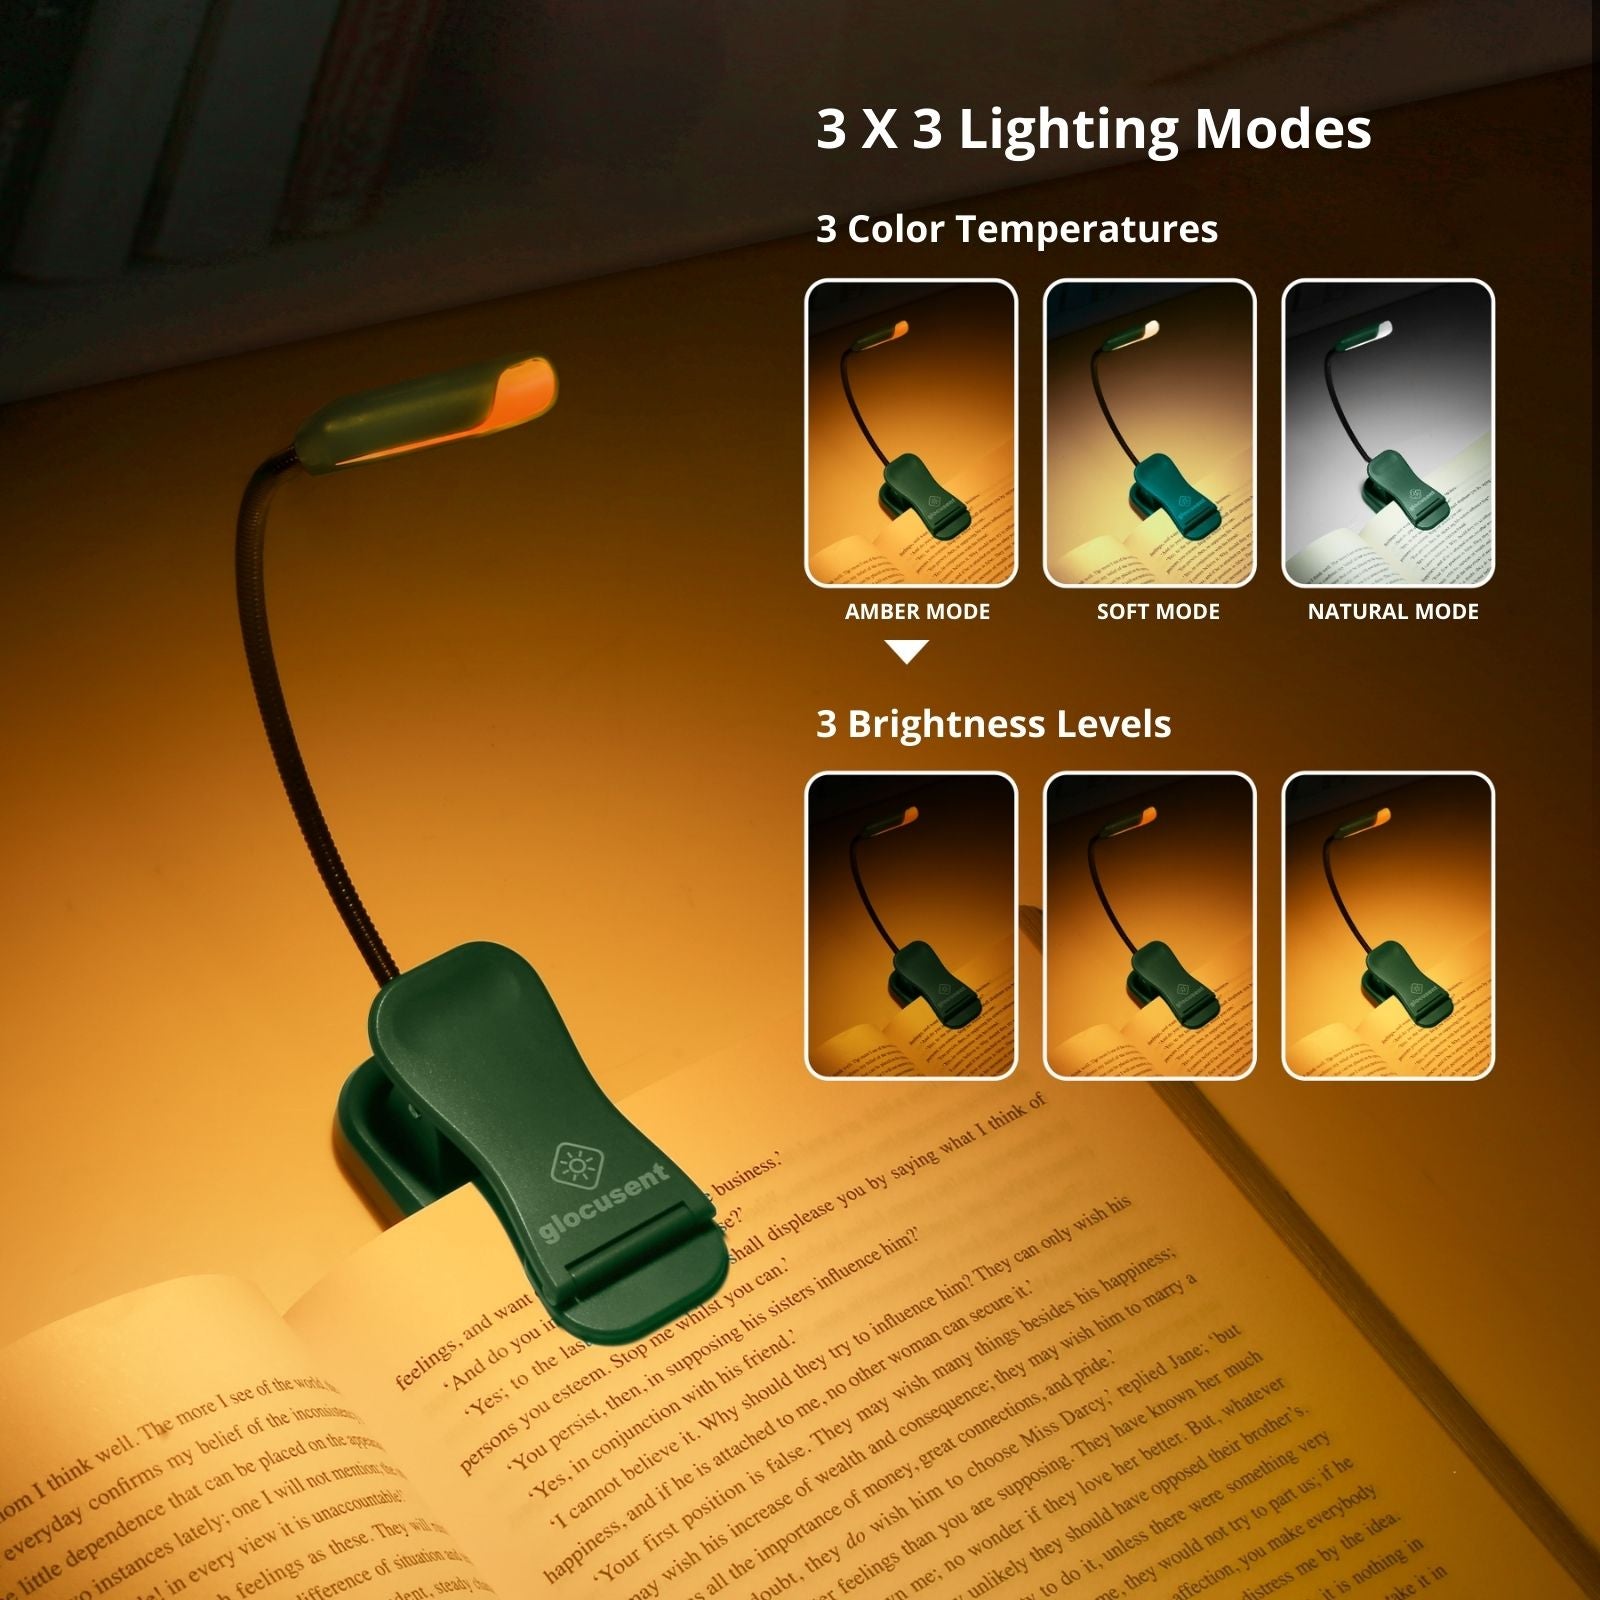 Review of the Glocusent Upgraded LED Neck Reading Craft Light